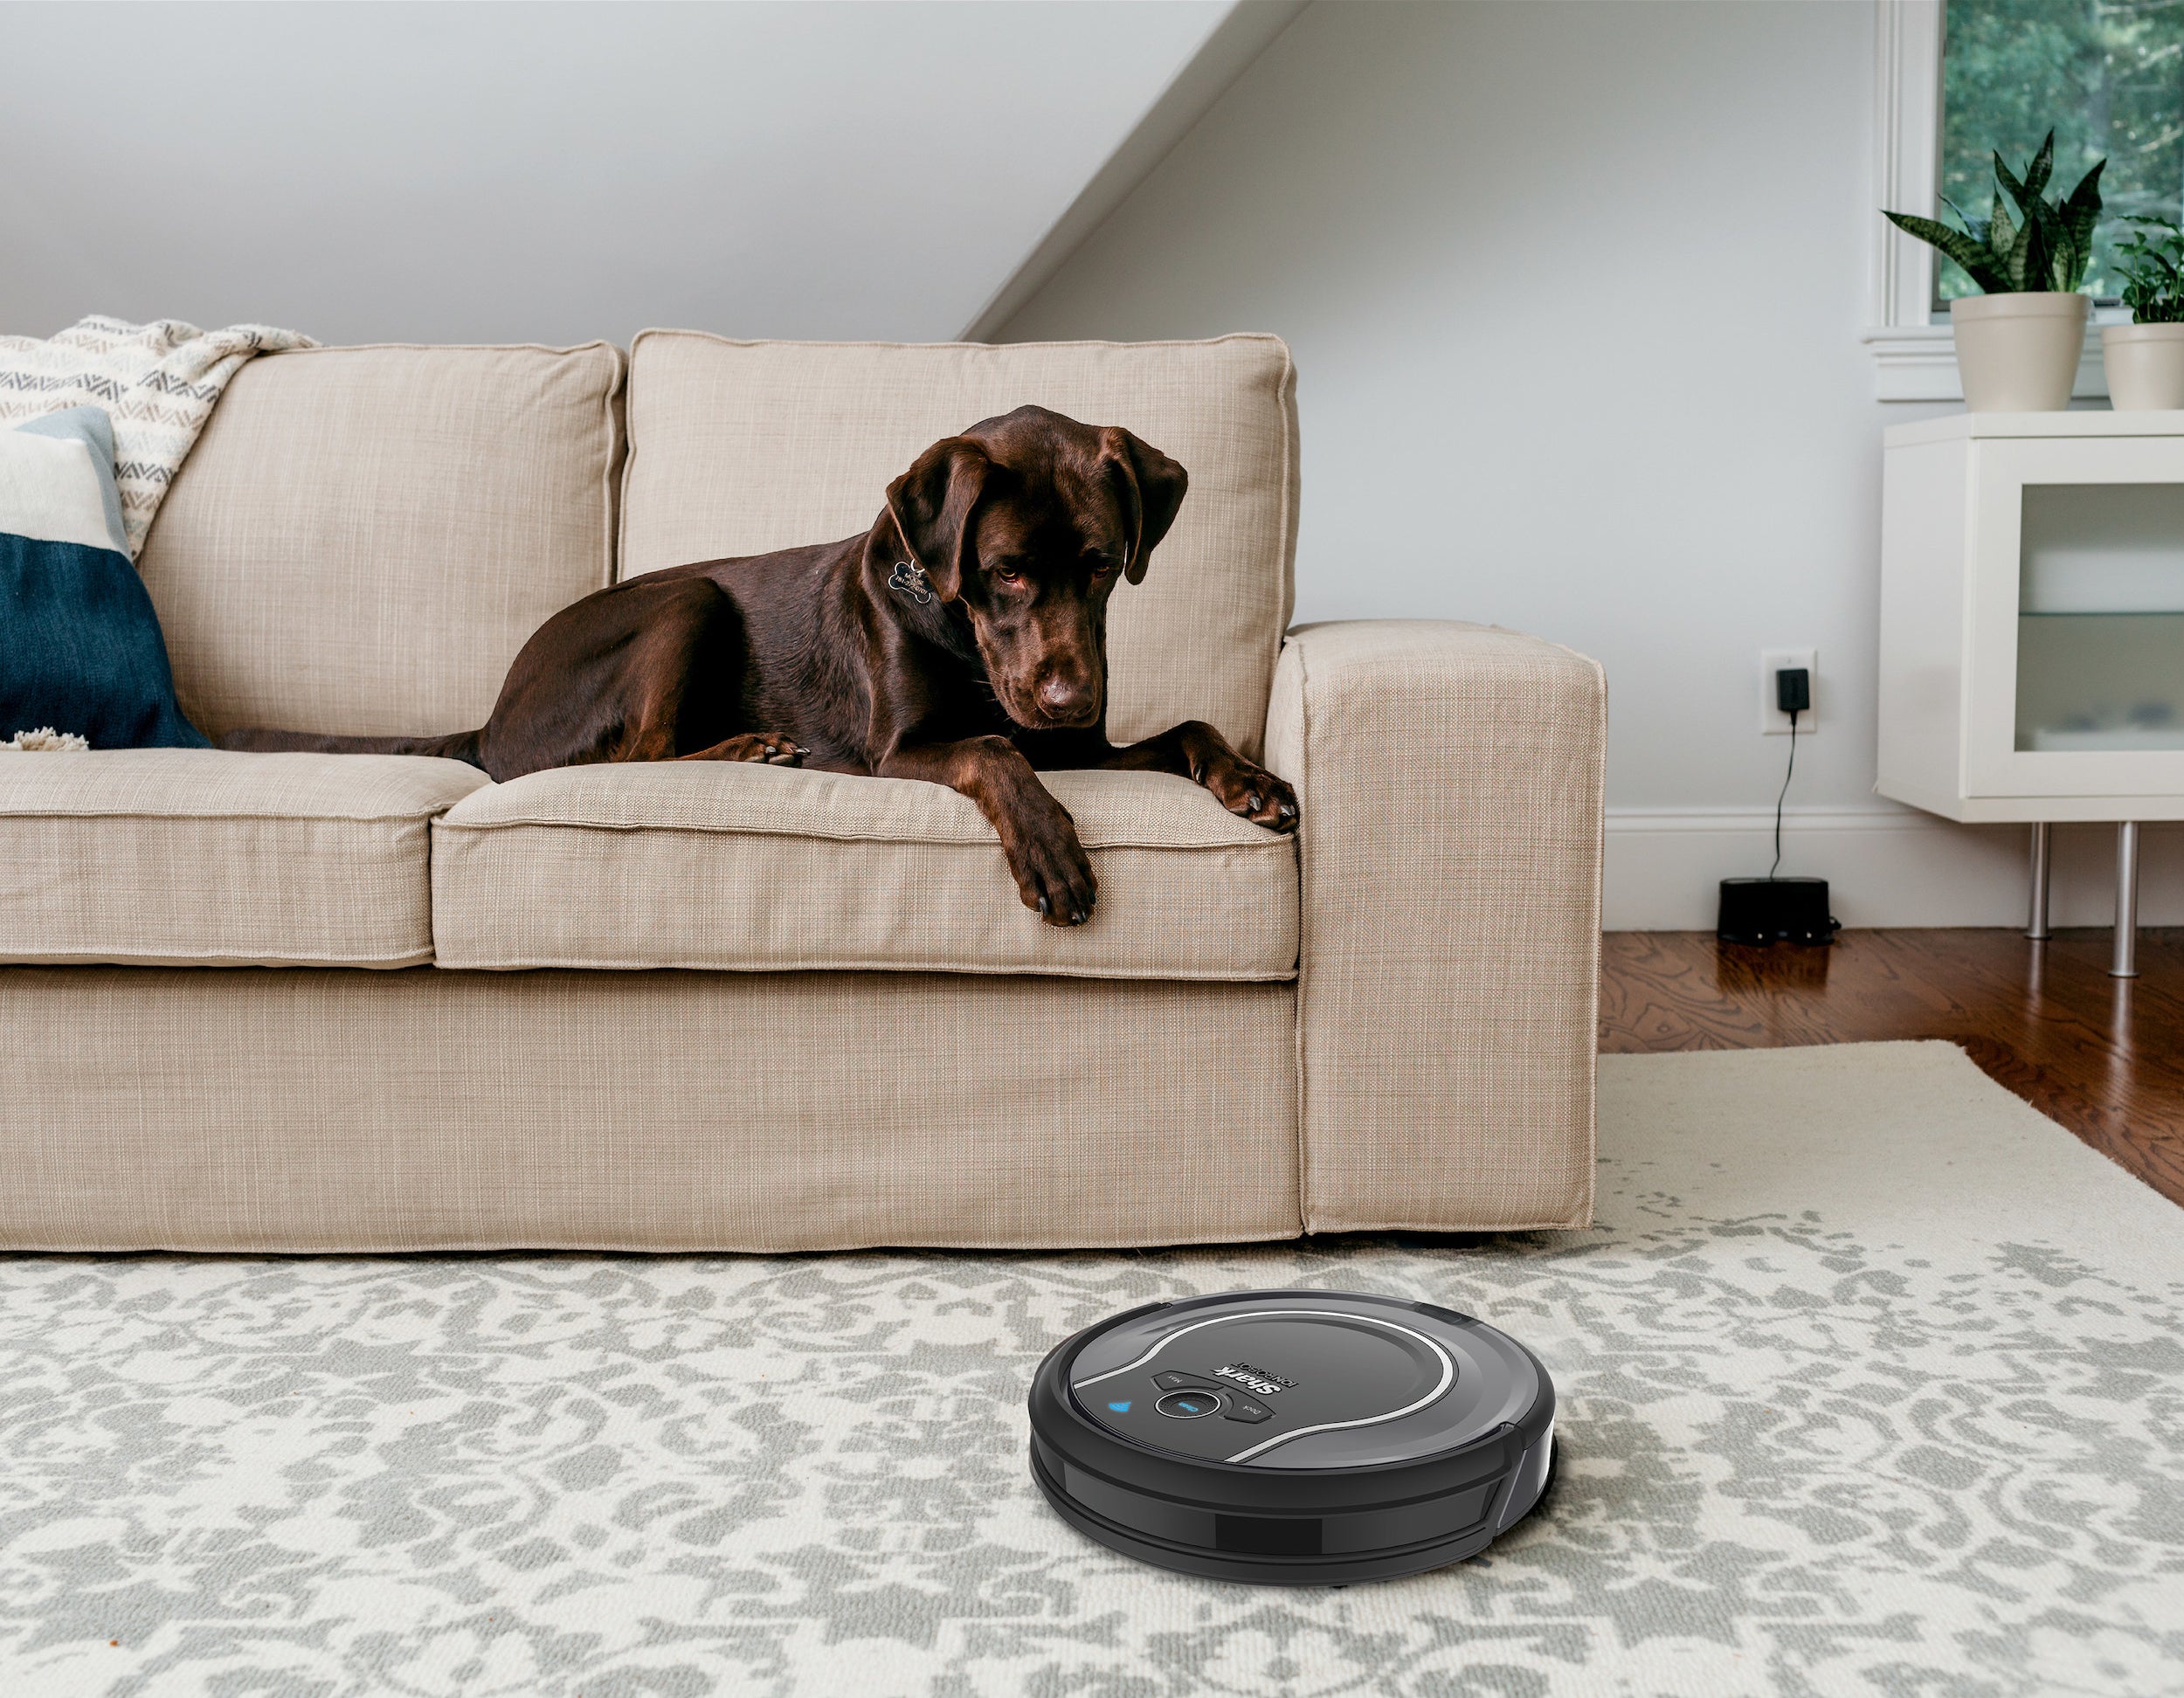 A dog on a couch looking at the robot vacuum